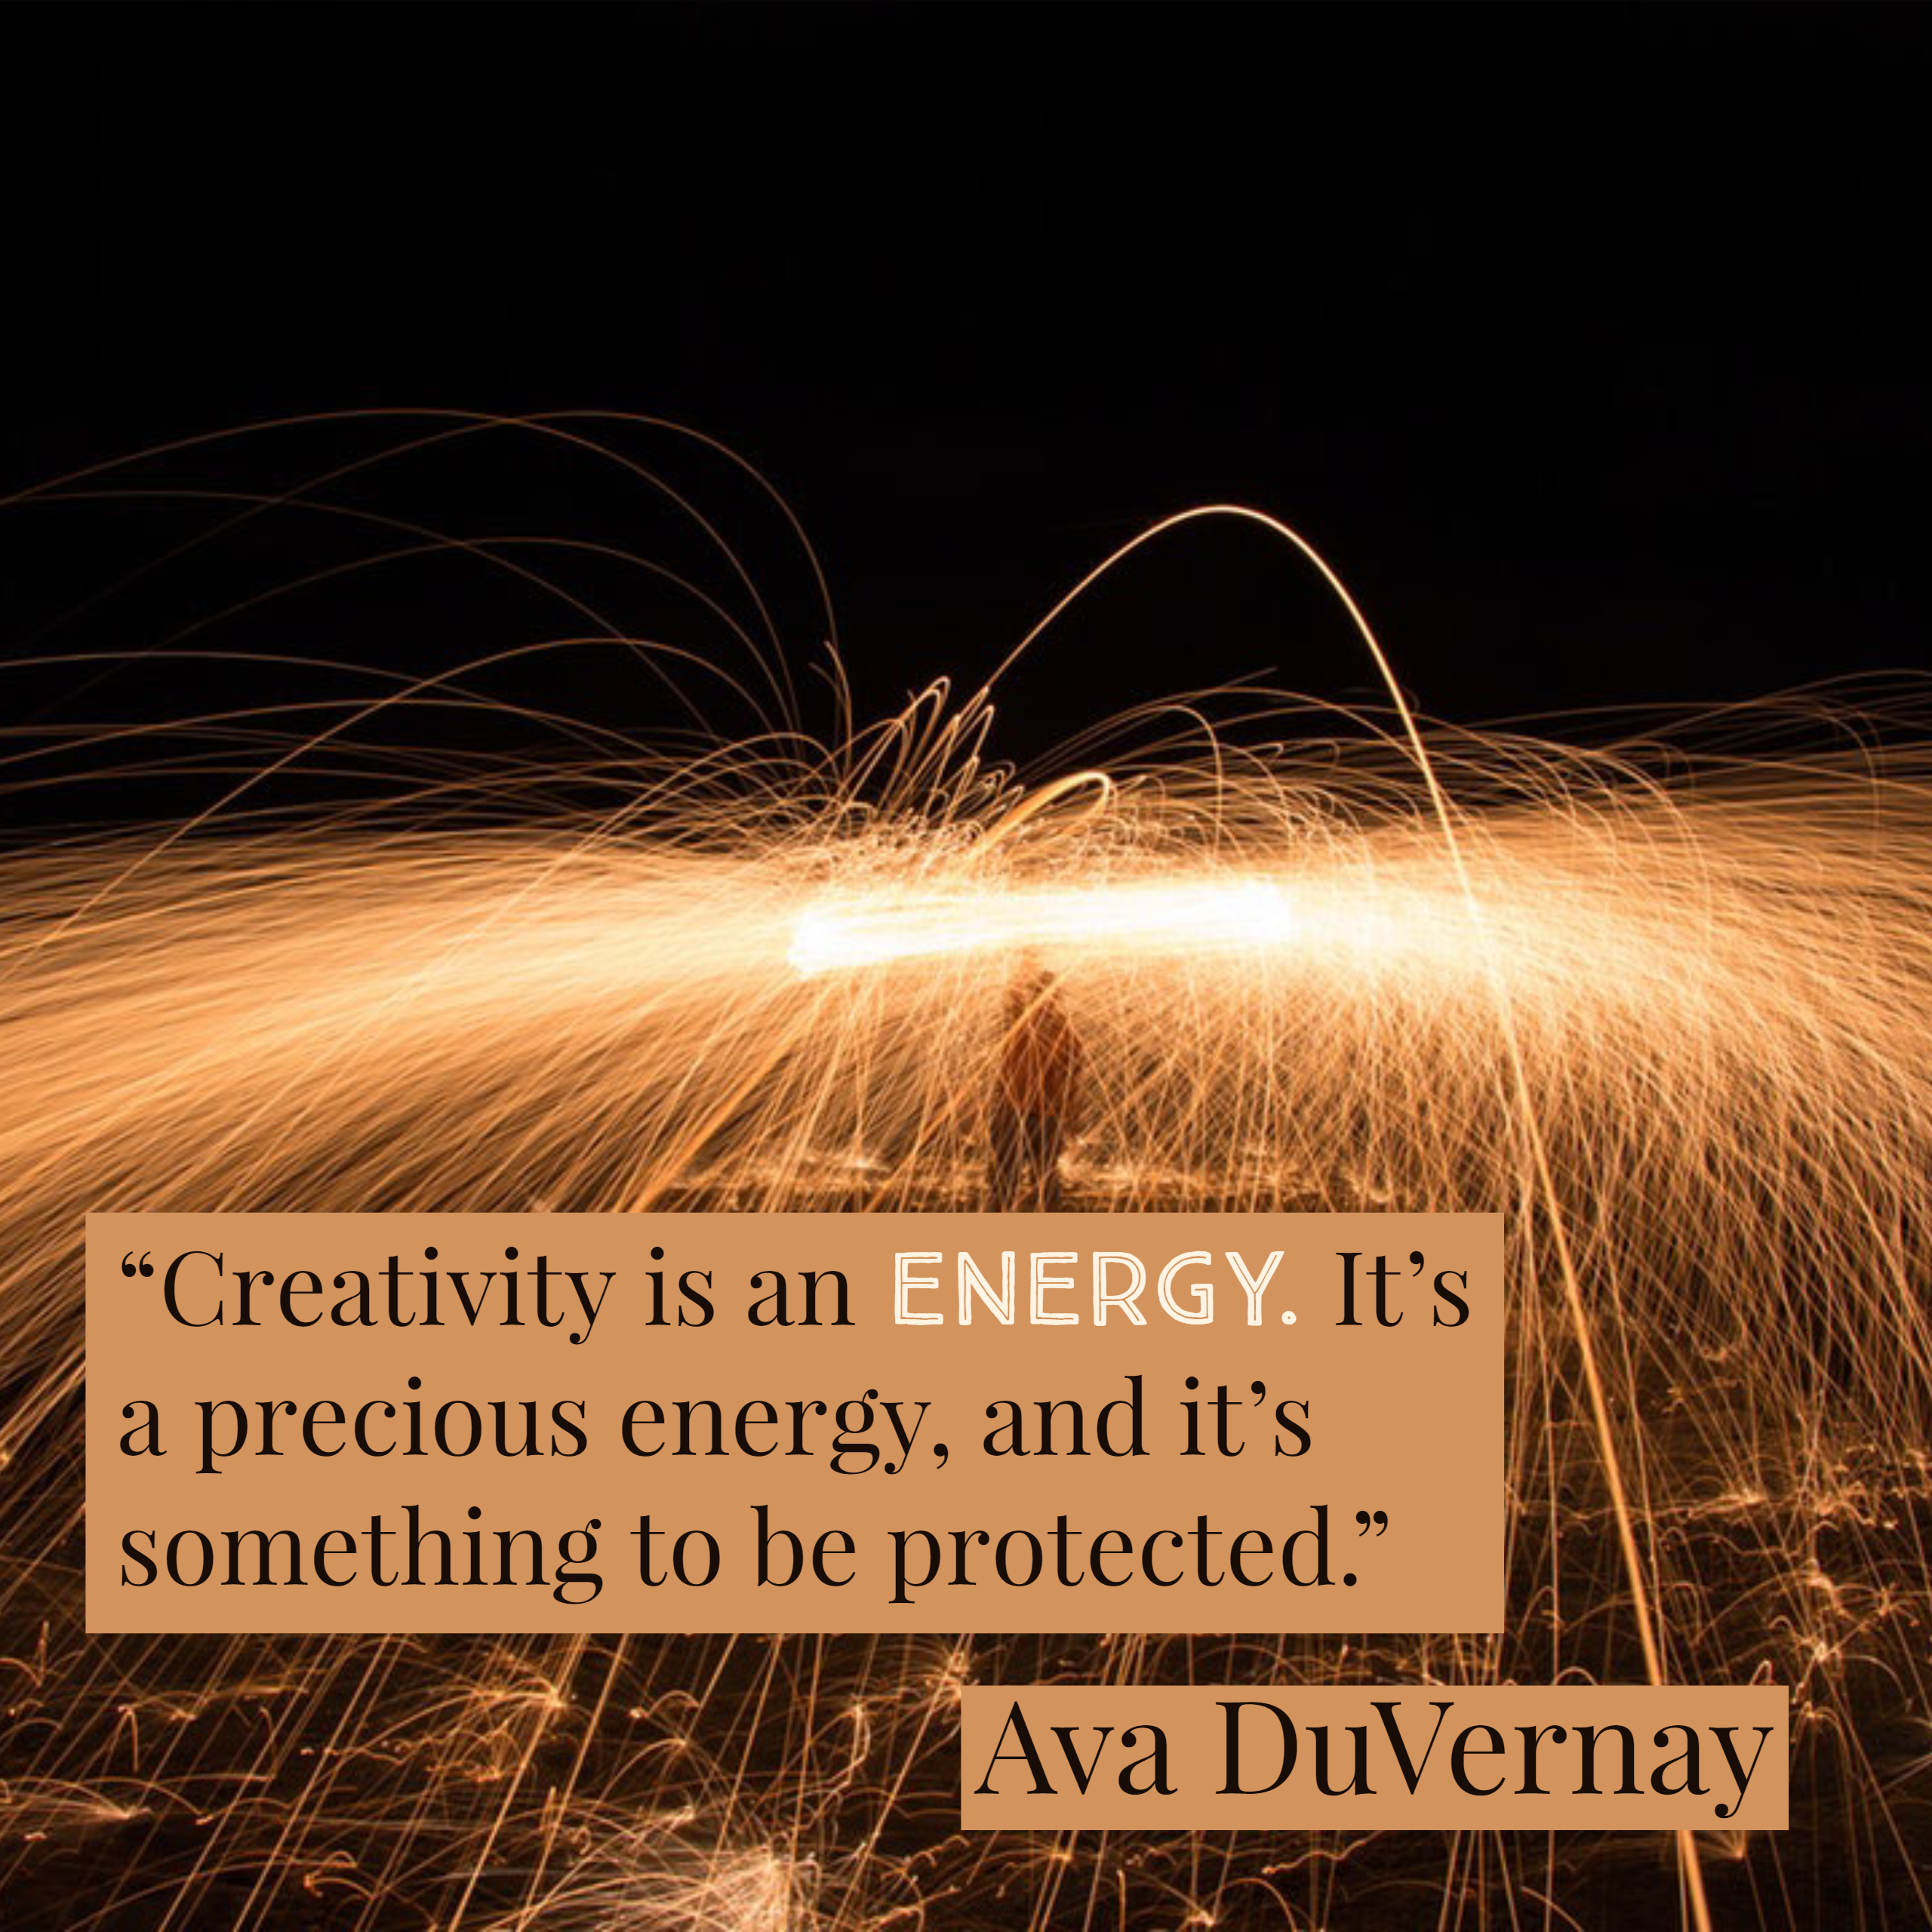 Creativity is an energy. It's a precious energy, and it's something to be protected.